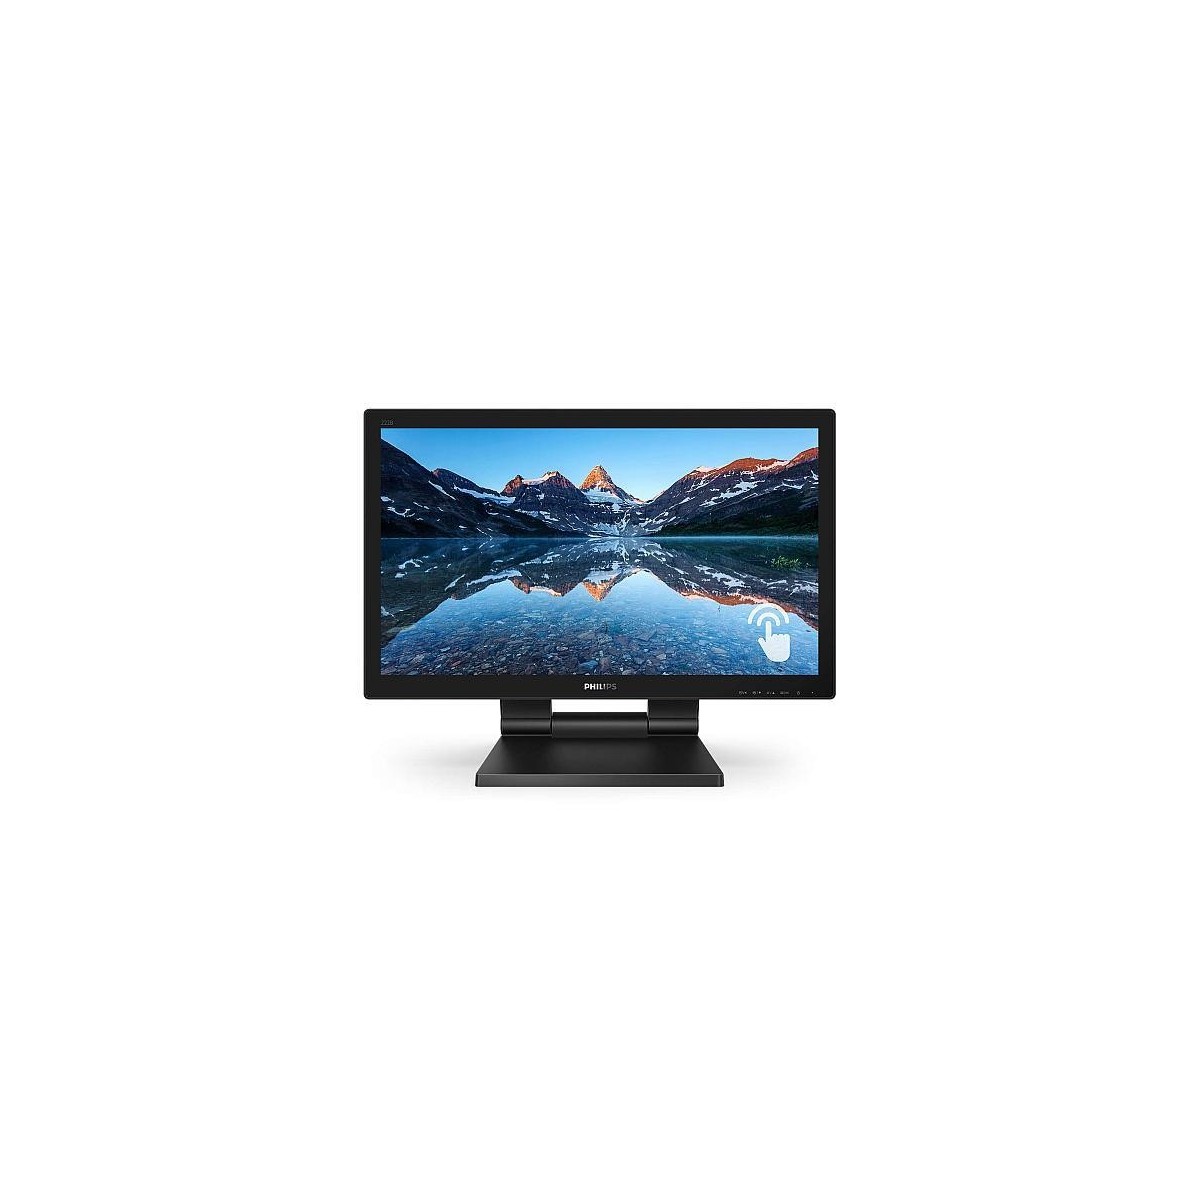 Philips LCD monitor with SmoothTouch 222B9T/00 - 54.6 cm (21.5") - 1920 x 1080 pixels - Full HD - TN+Film - 1 ms - Black